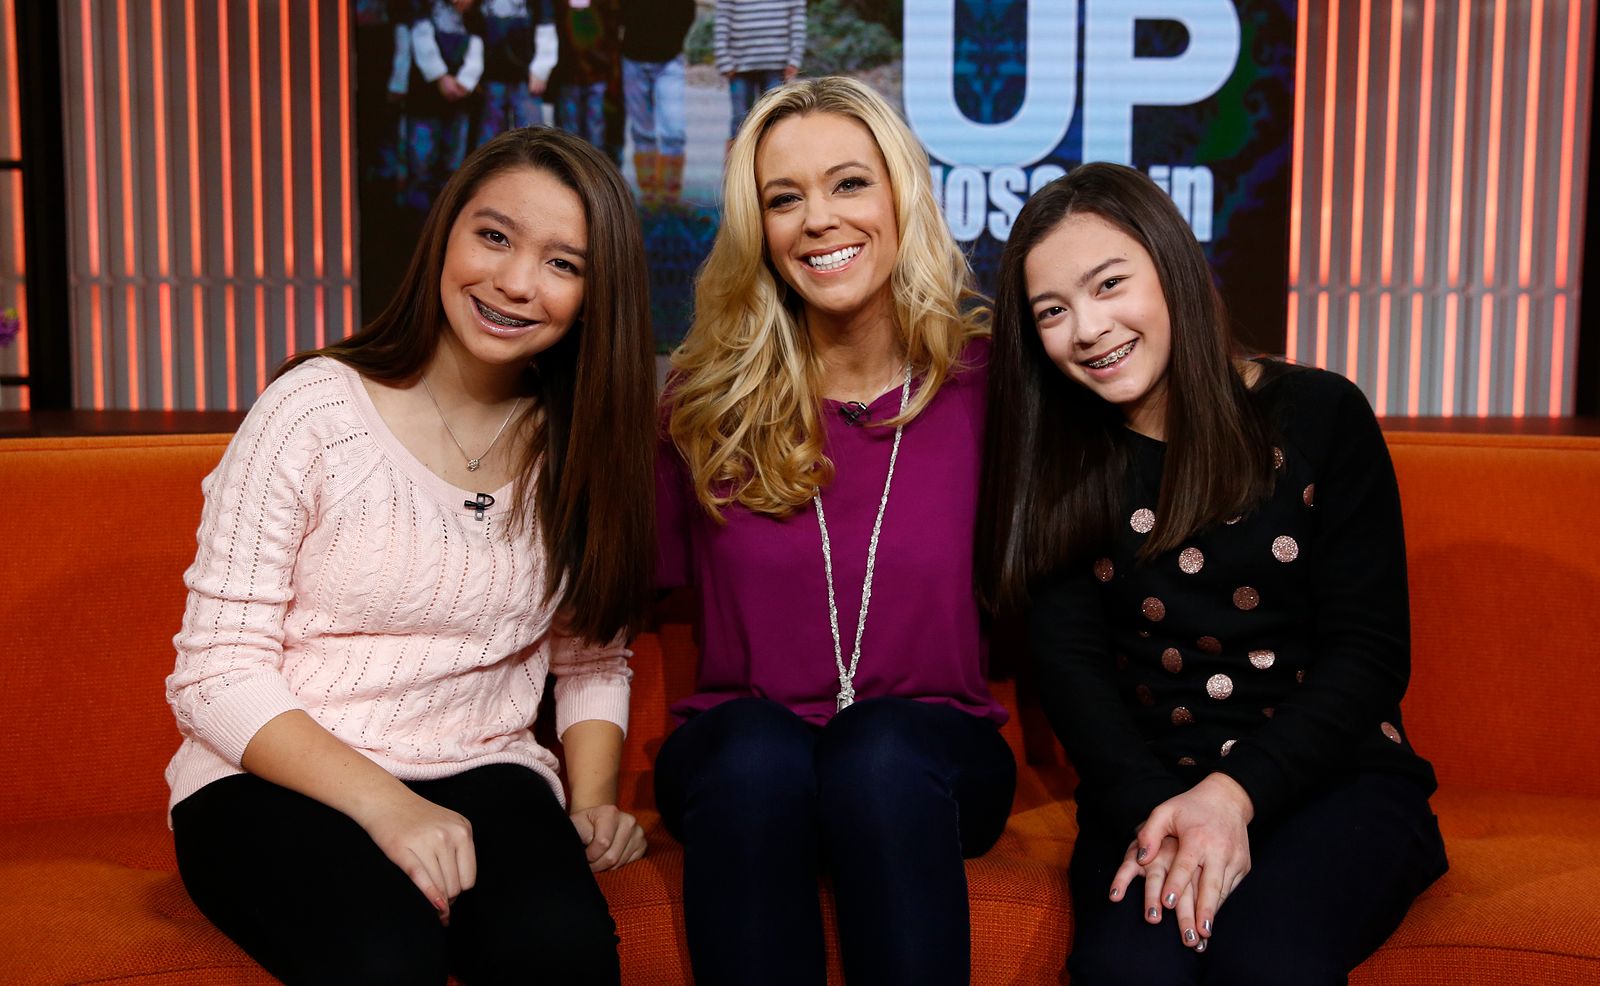 Cara, Kate, and Mady Gosselin appear on NBC News' "Today" show on January 16, 2014 | Photo: Peter Kramer/NBC/NBC Newswire/NBCUniversal/Getty Images